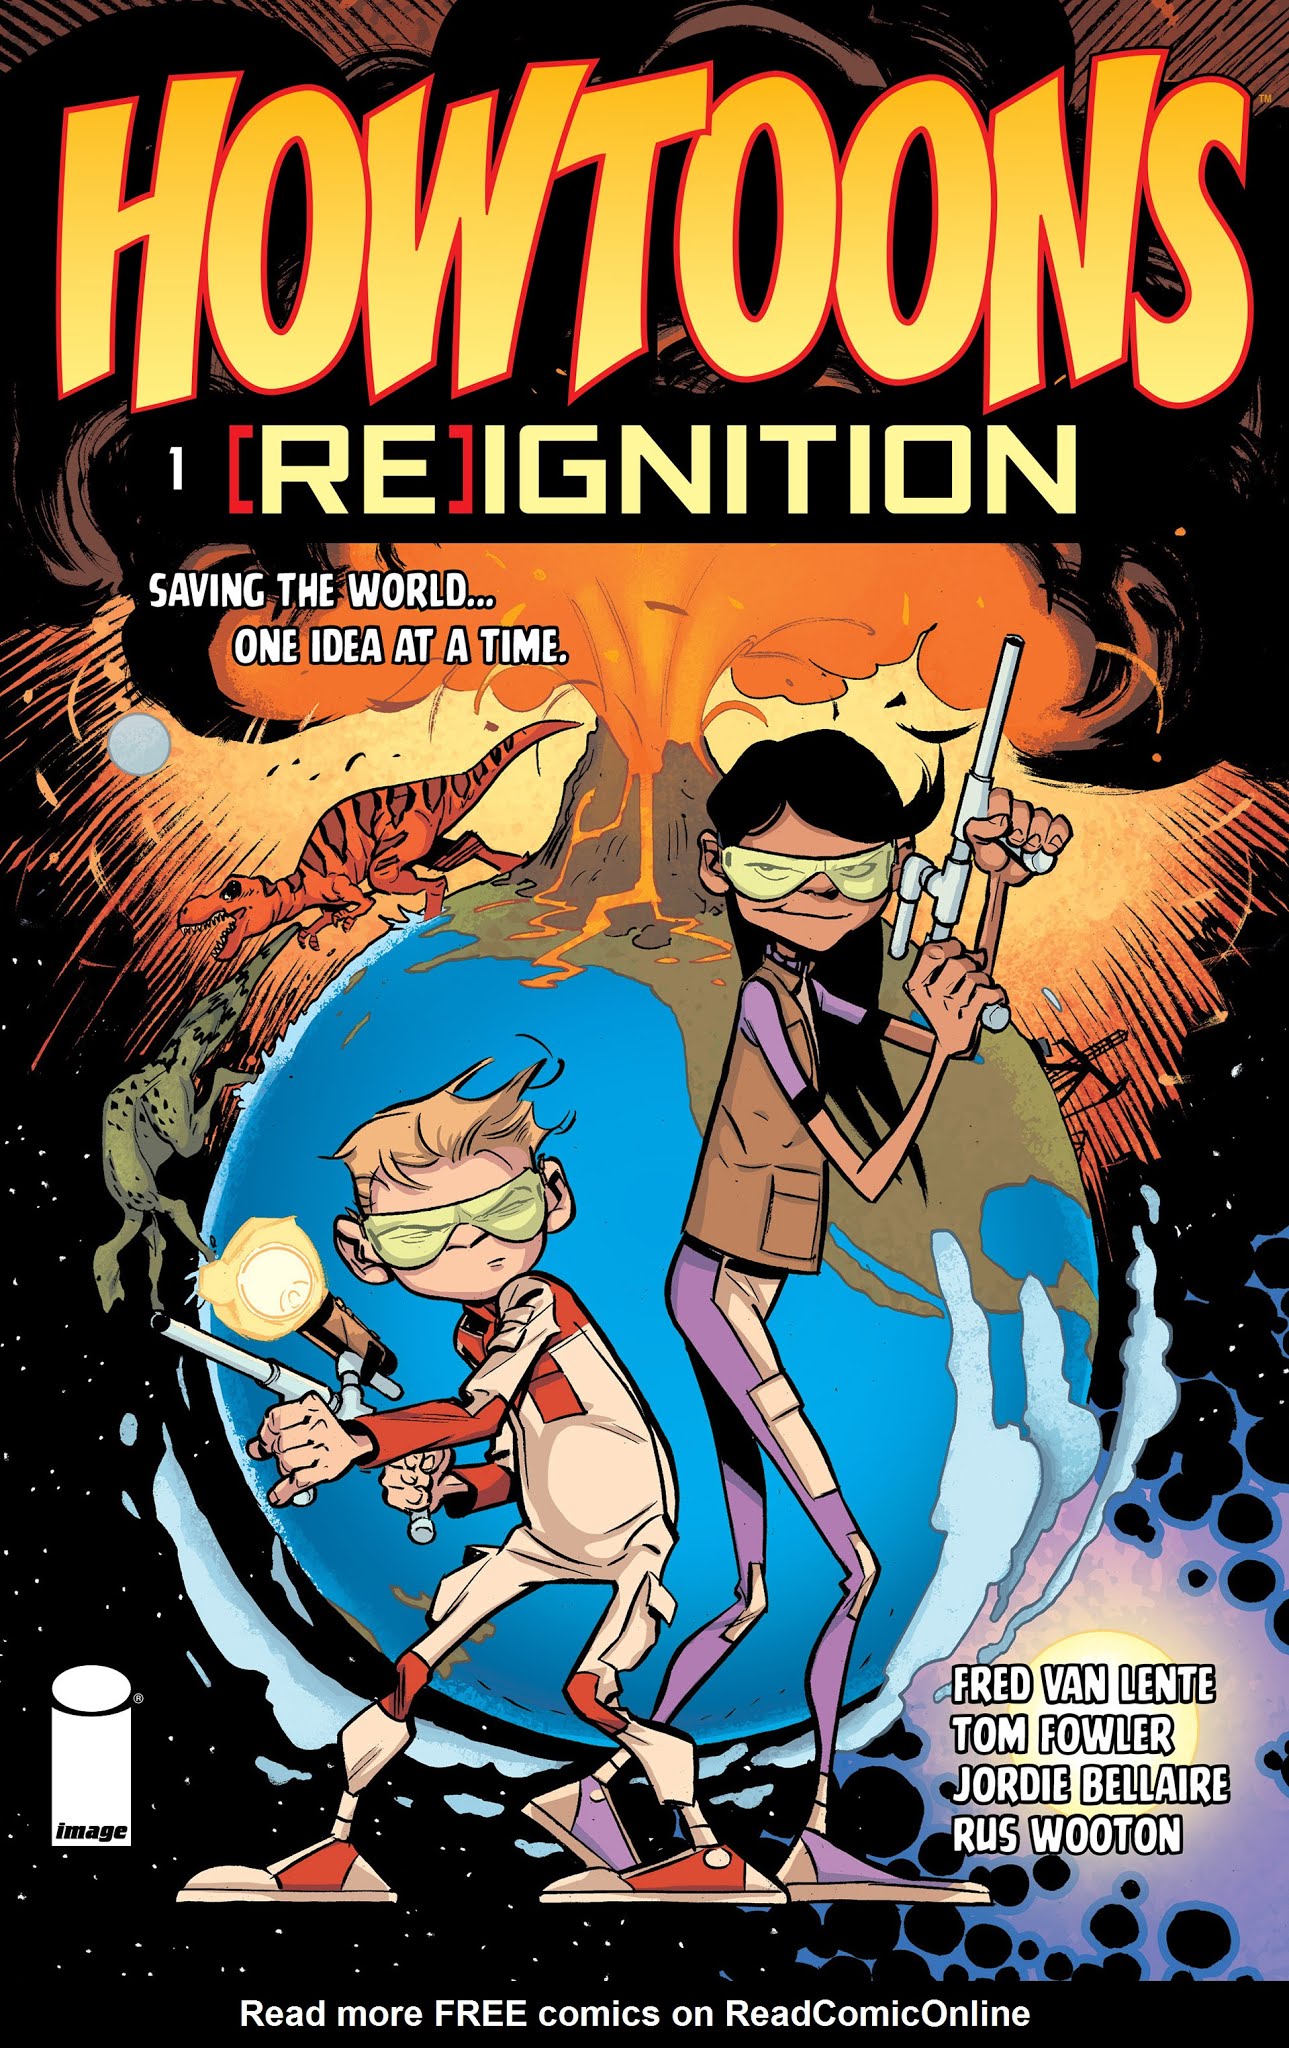 Read online Howtoons [Re]Ignition comic -  Issue #1 - 1